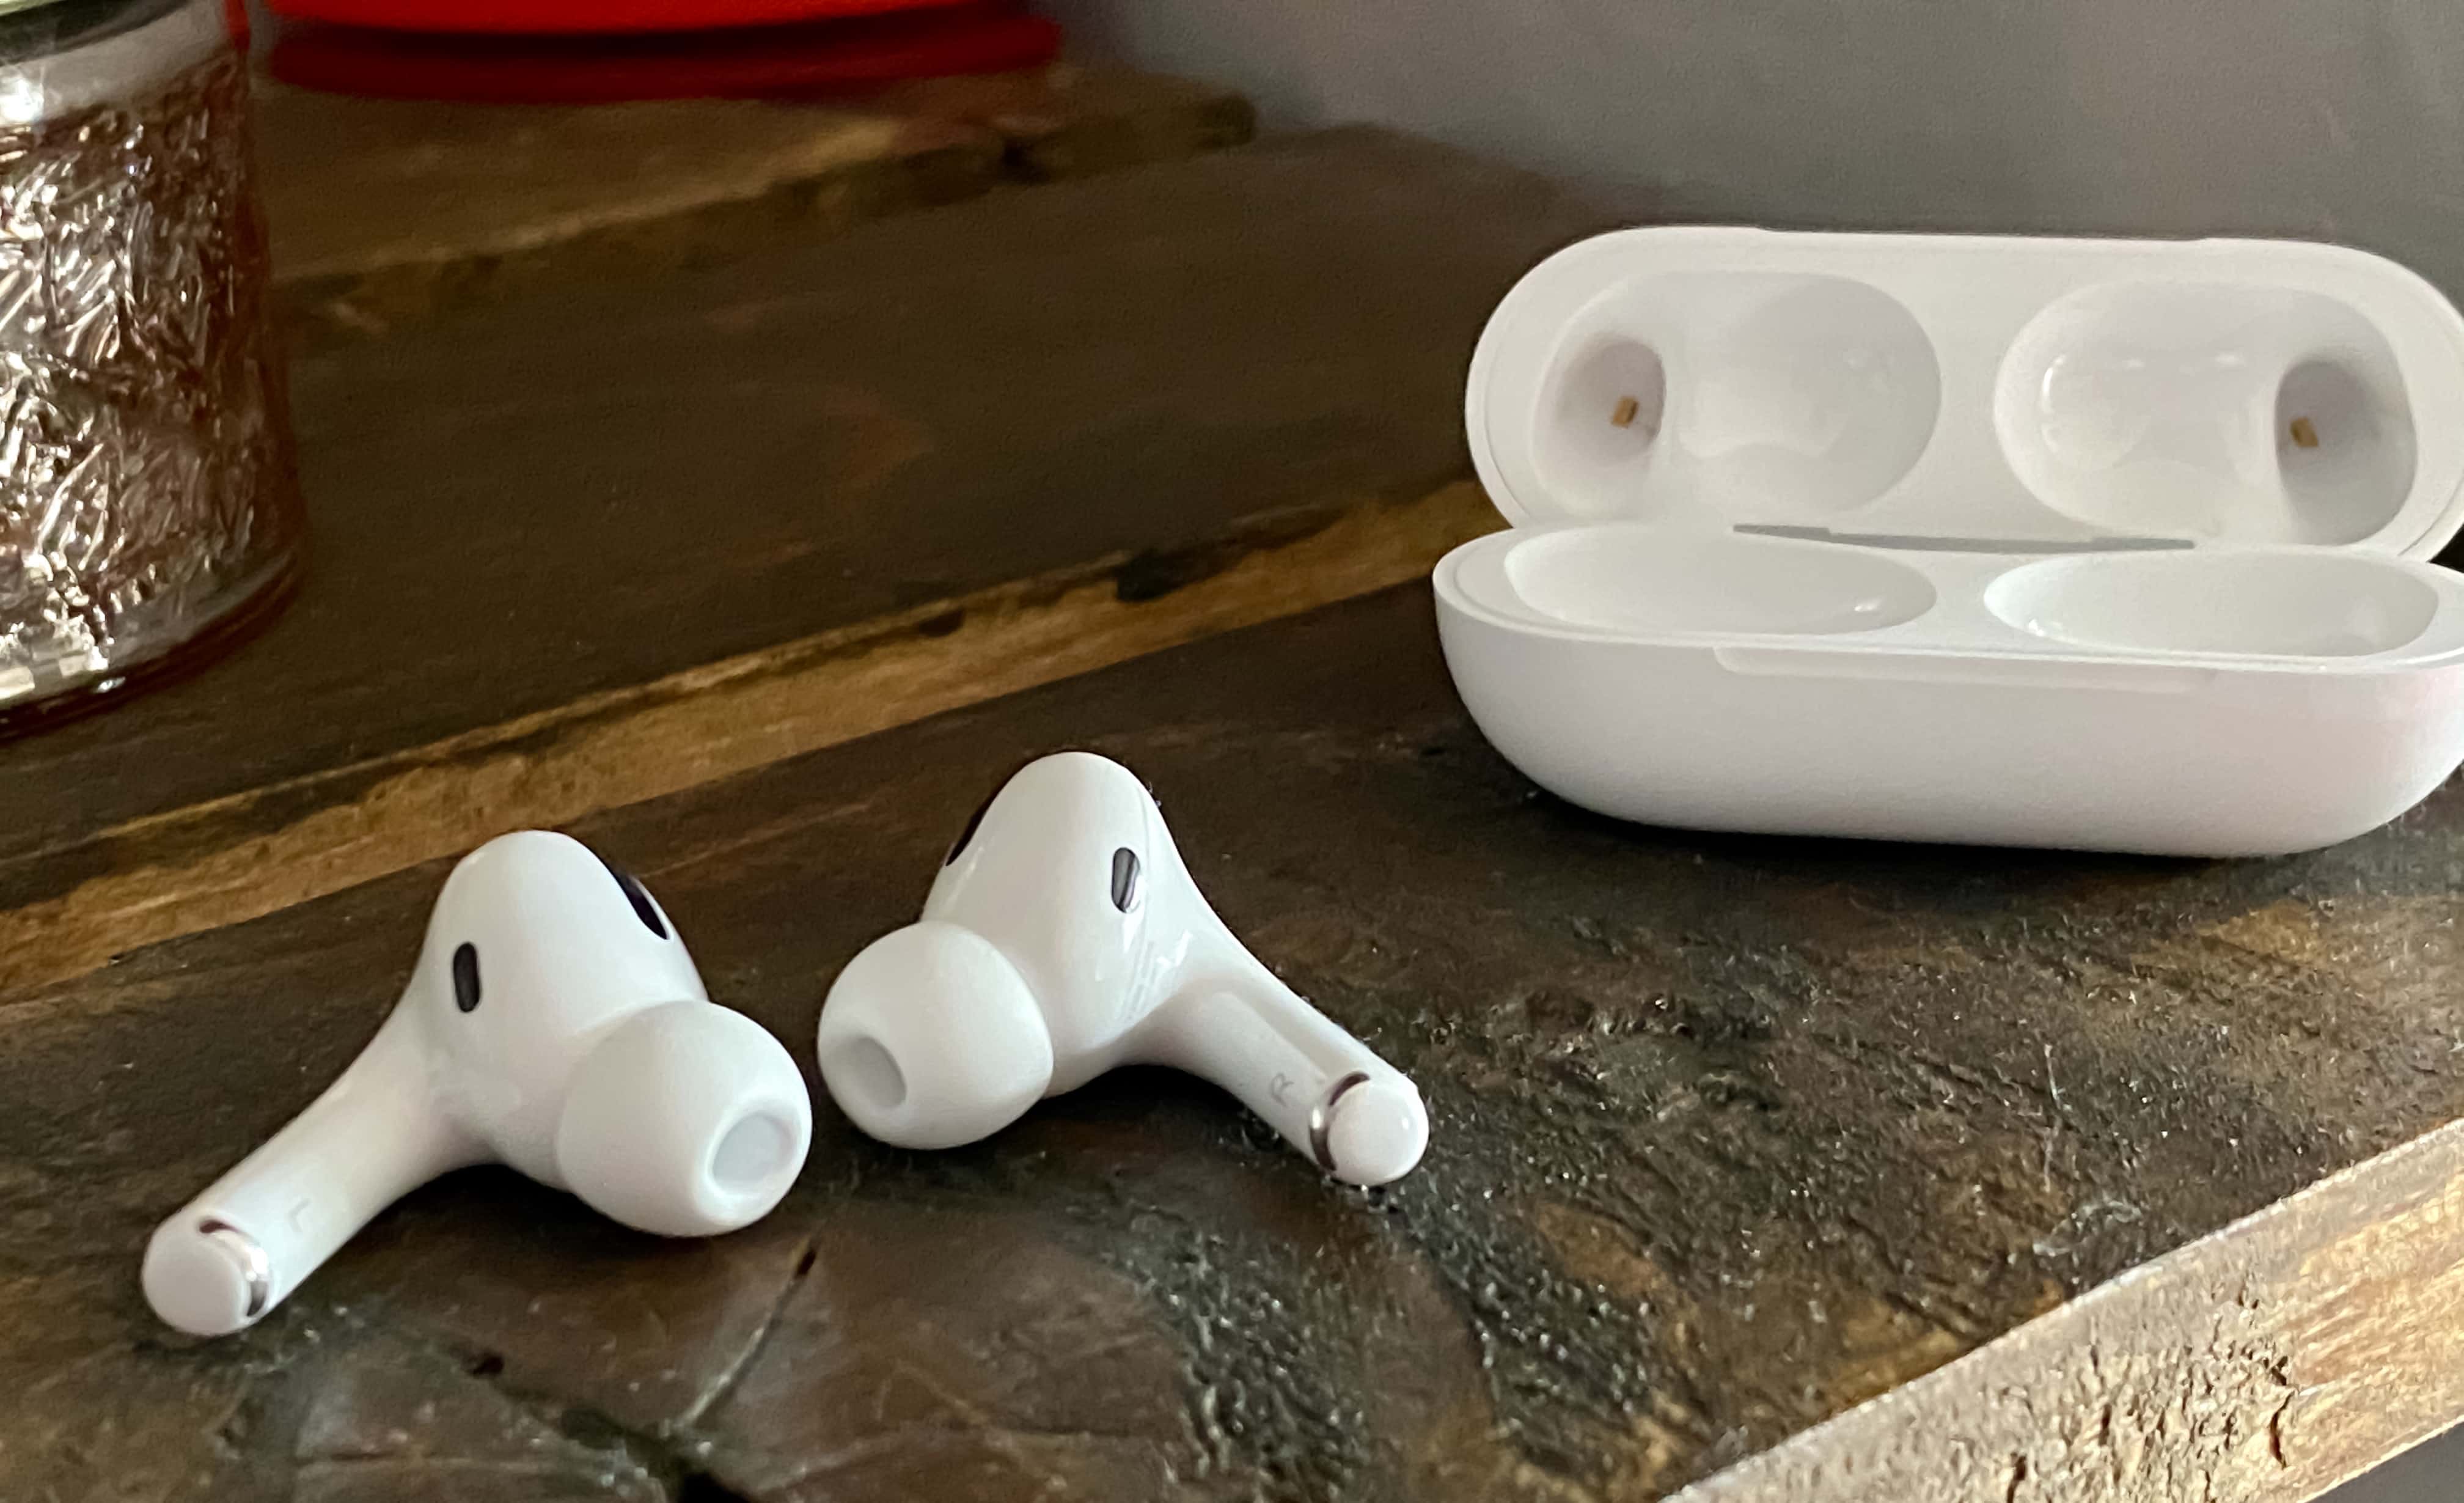 Demand could far exceed supply for AirPods this holidays